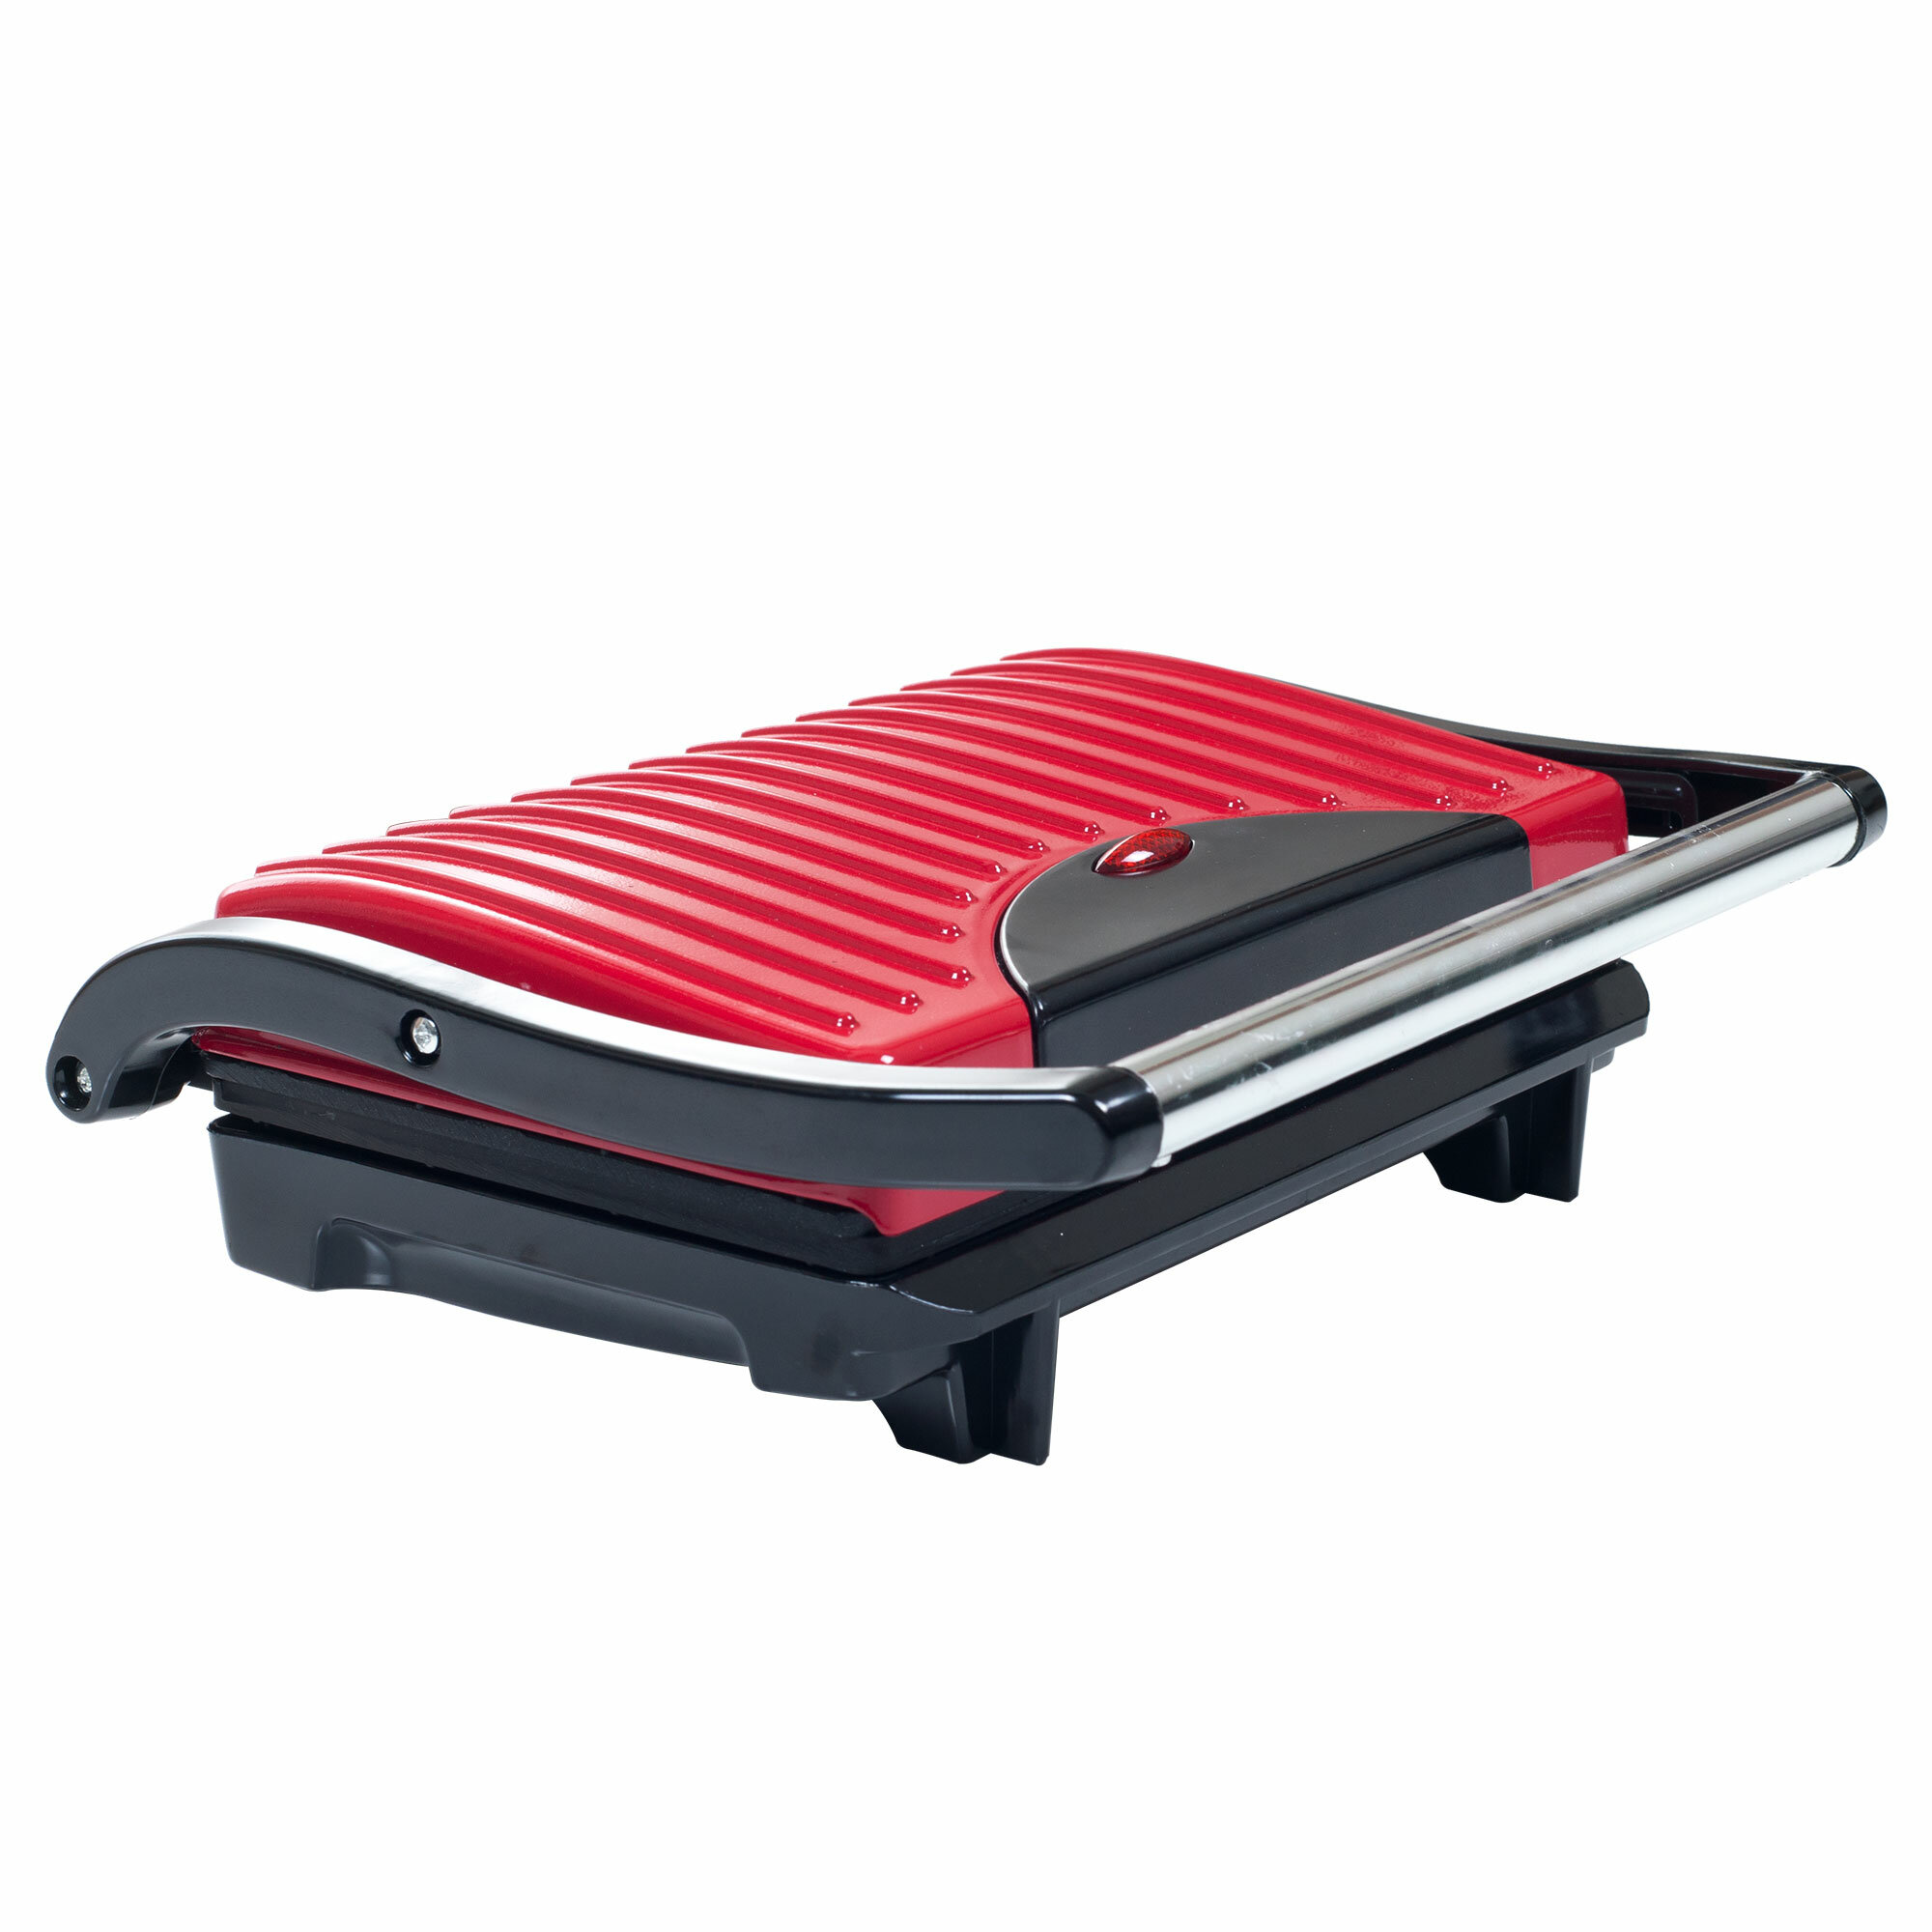 Panini Press Grill and Gourmet Sandwich Maker for Healthy Cooking by Chef  Buddy